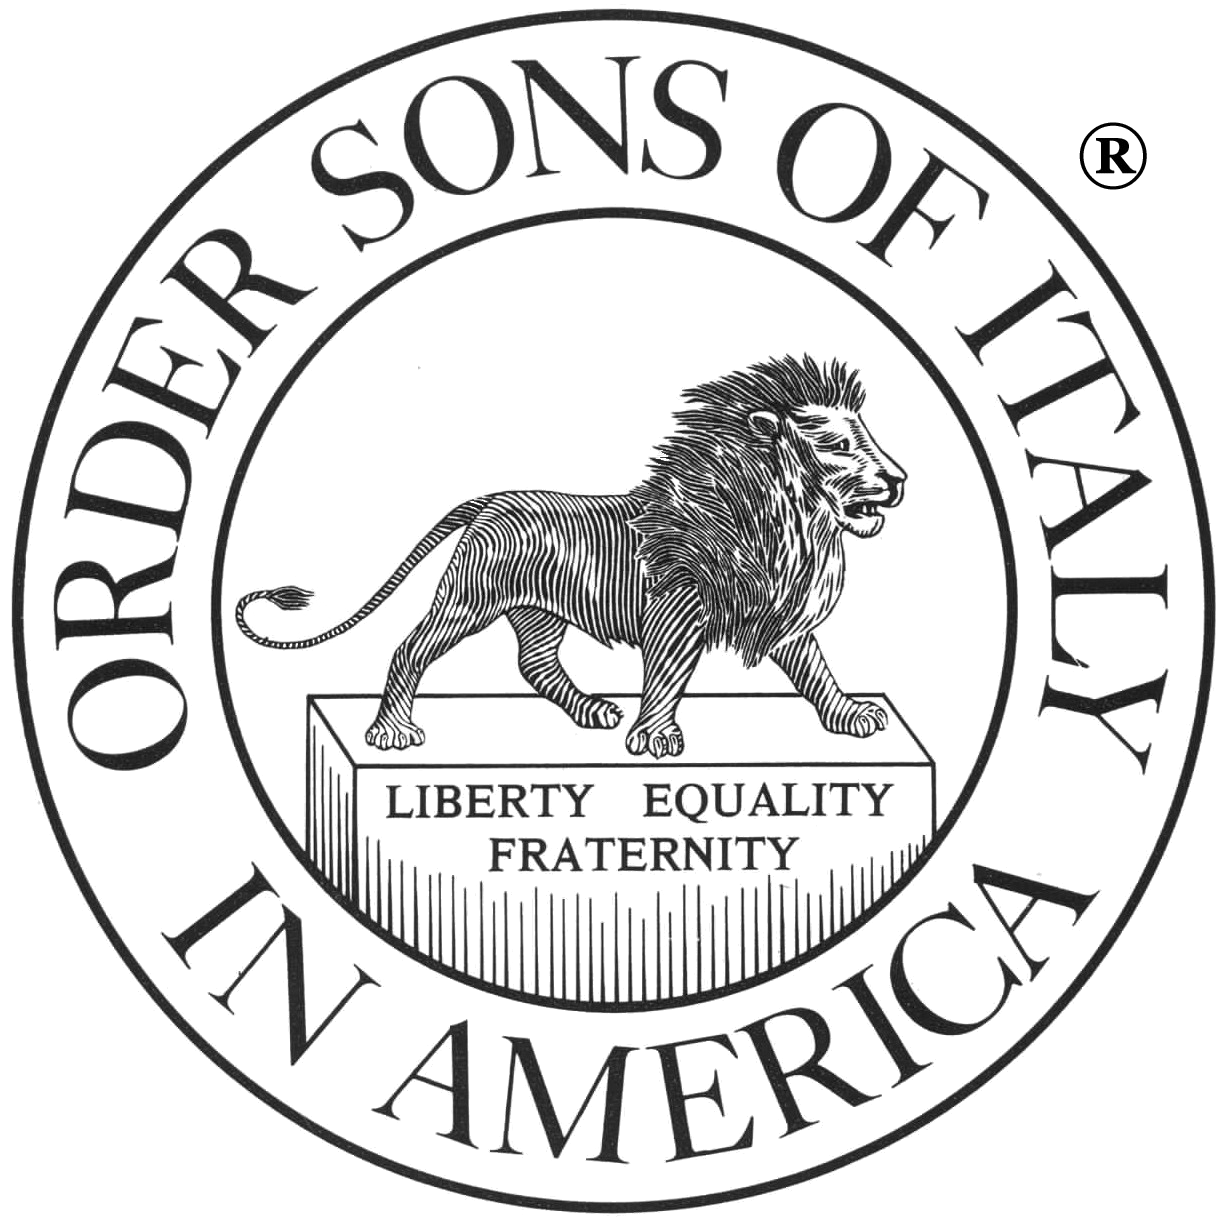 Orders Sons and Daughters of Italy in America